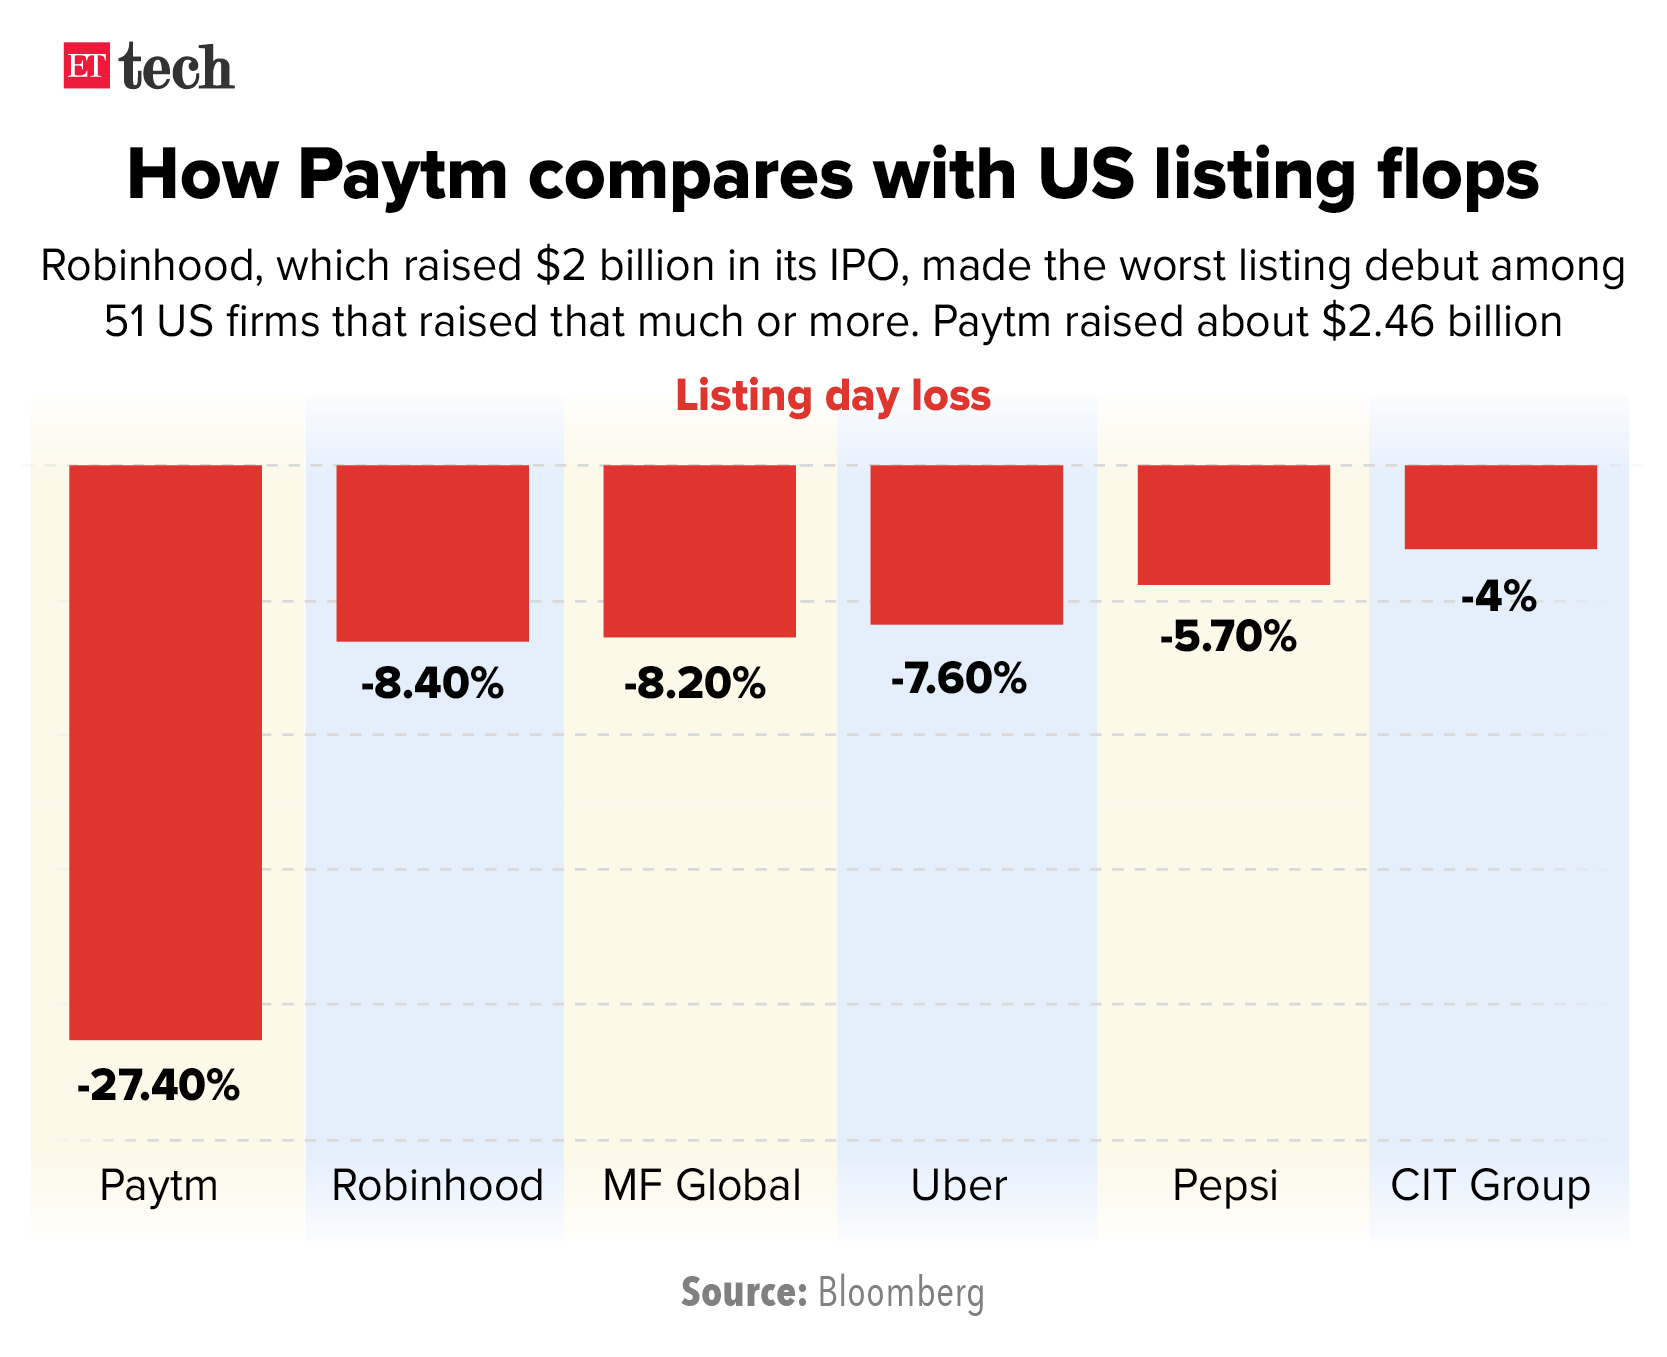 How Paytm compares with US listing flops